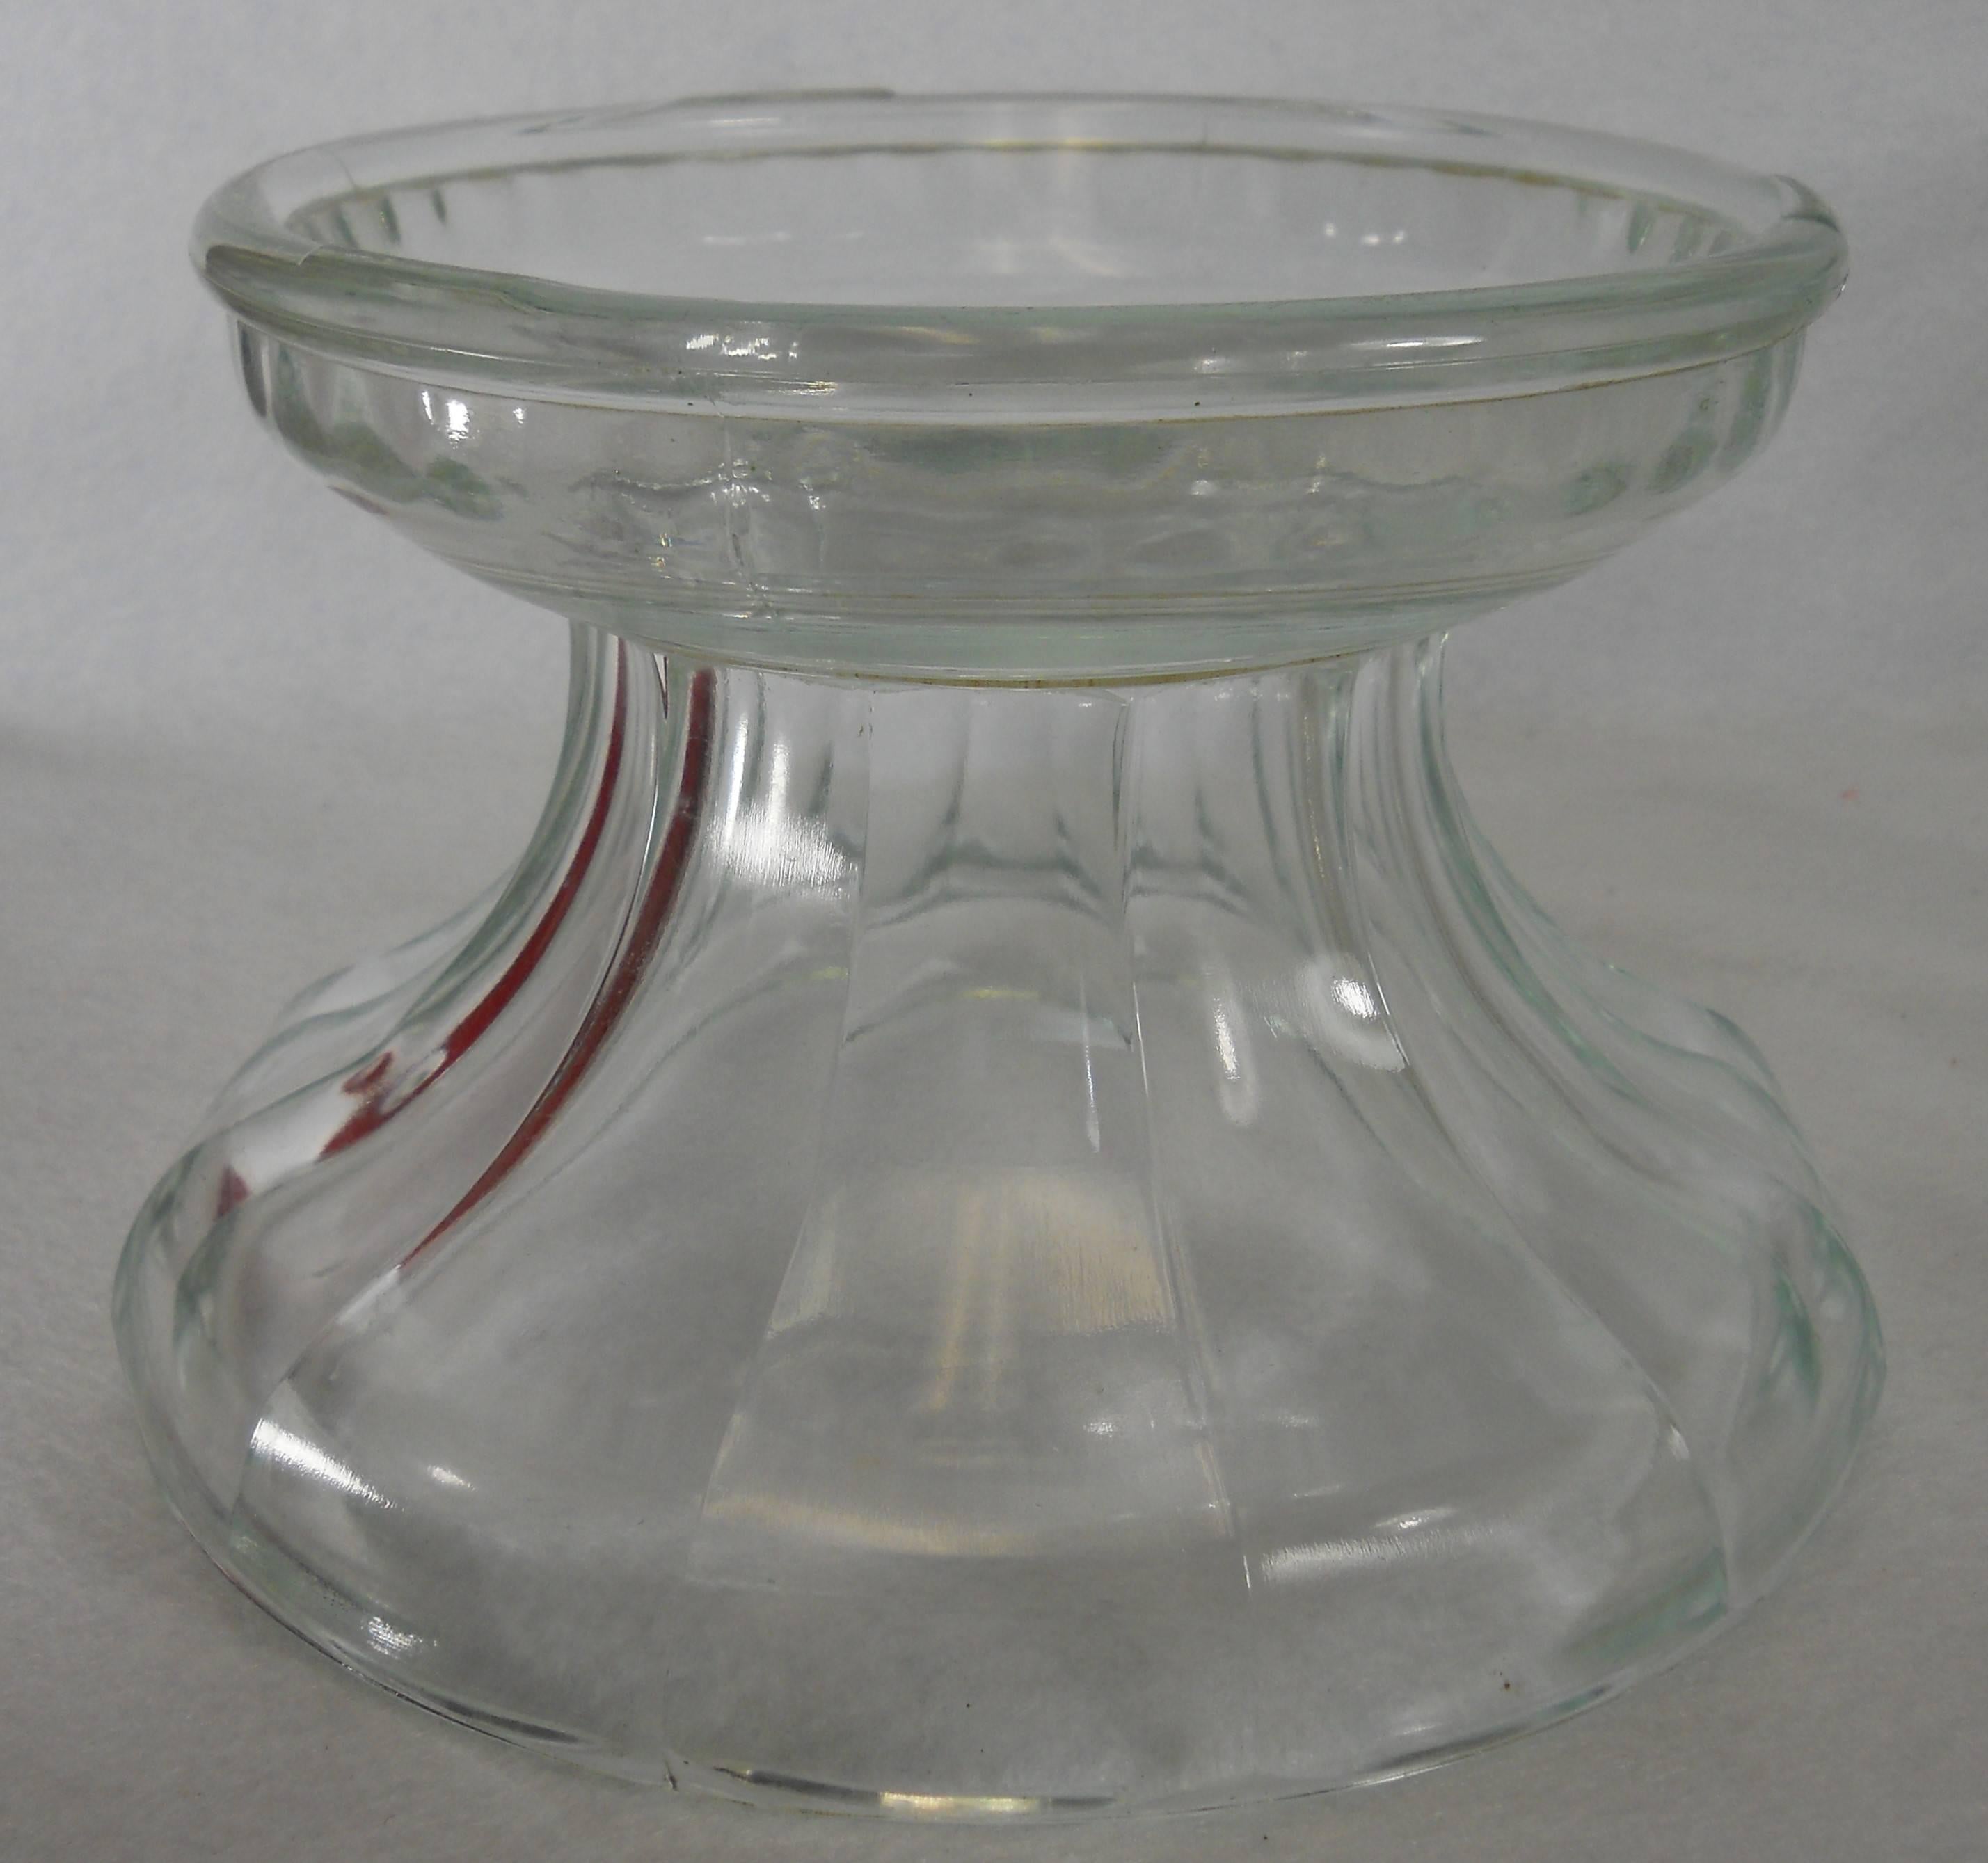 1962 Indiana Glass Co
Paneled
PUNCH BOWL with Scalloped Rim
Pattern #7115
12-4oz punch cups 2-1/4